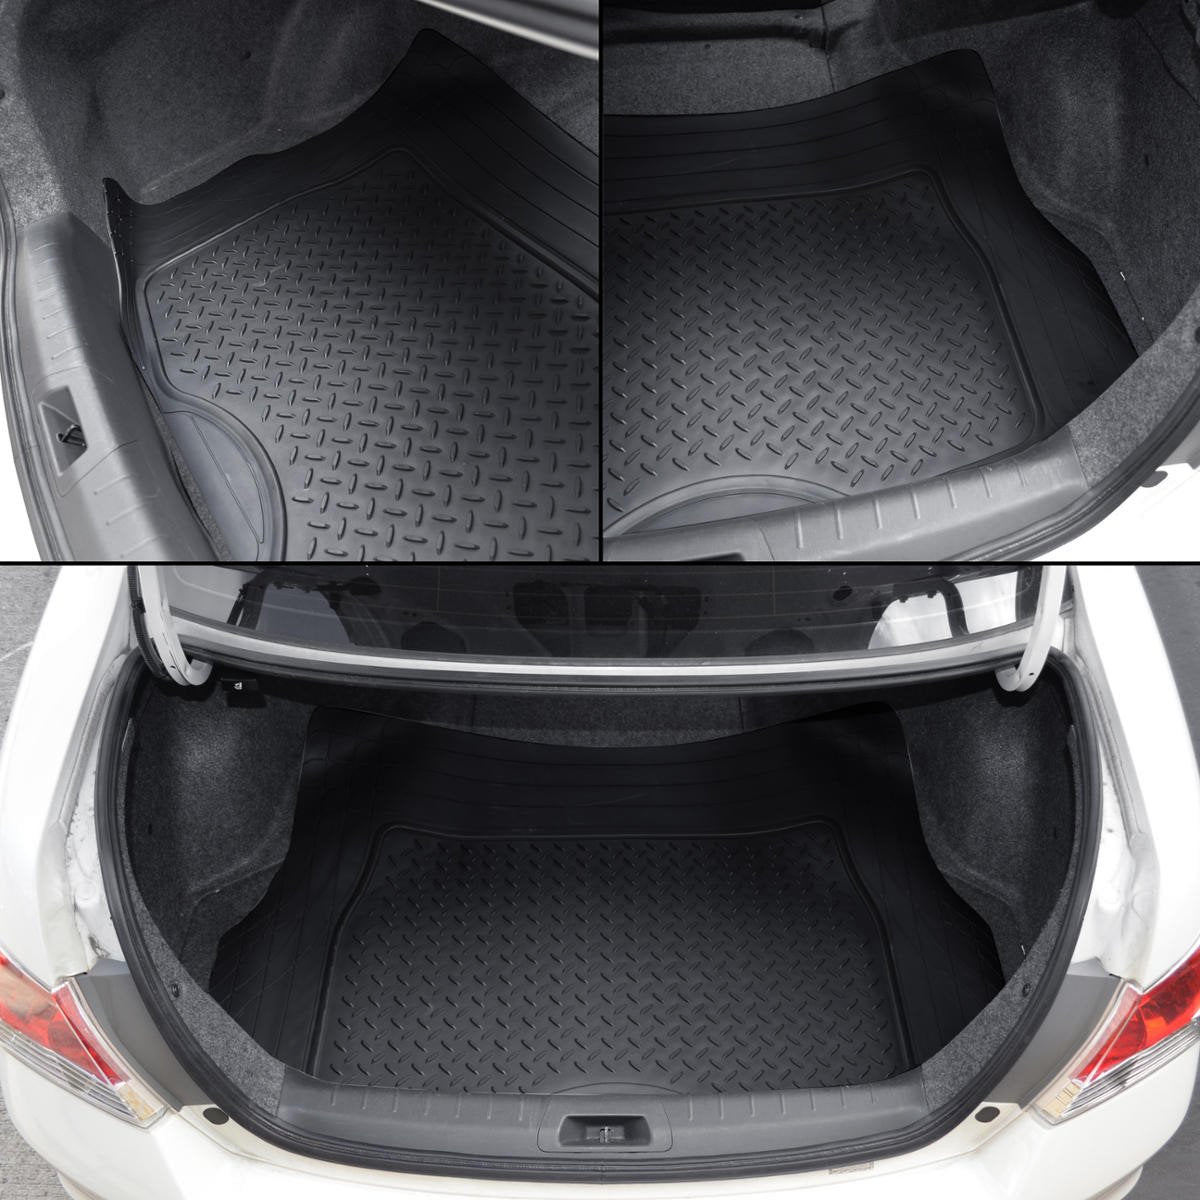 Motor Trend Heavy Duty Utility Cargo Liner Floor Mats for Car Truck SUV, Trimmable to Fit Trunk, All Weather Protection - Black:#000000